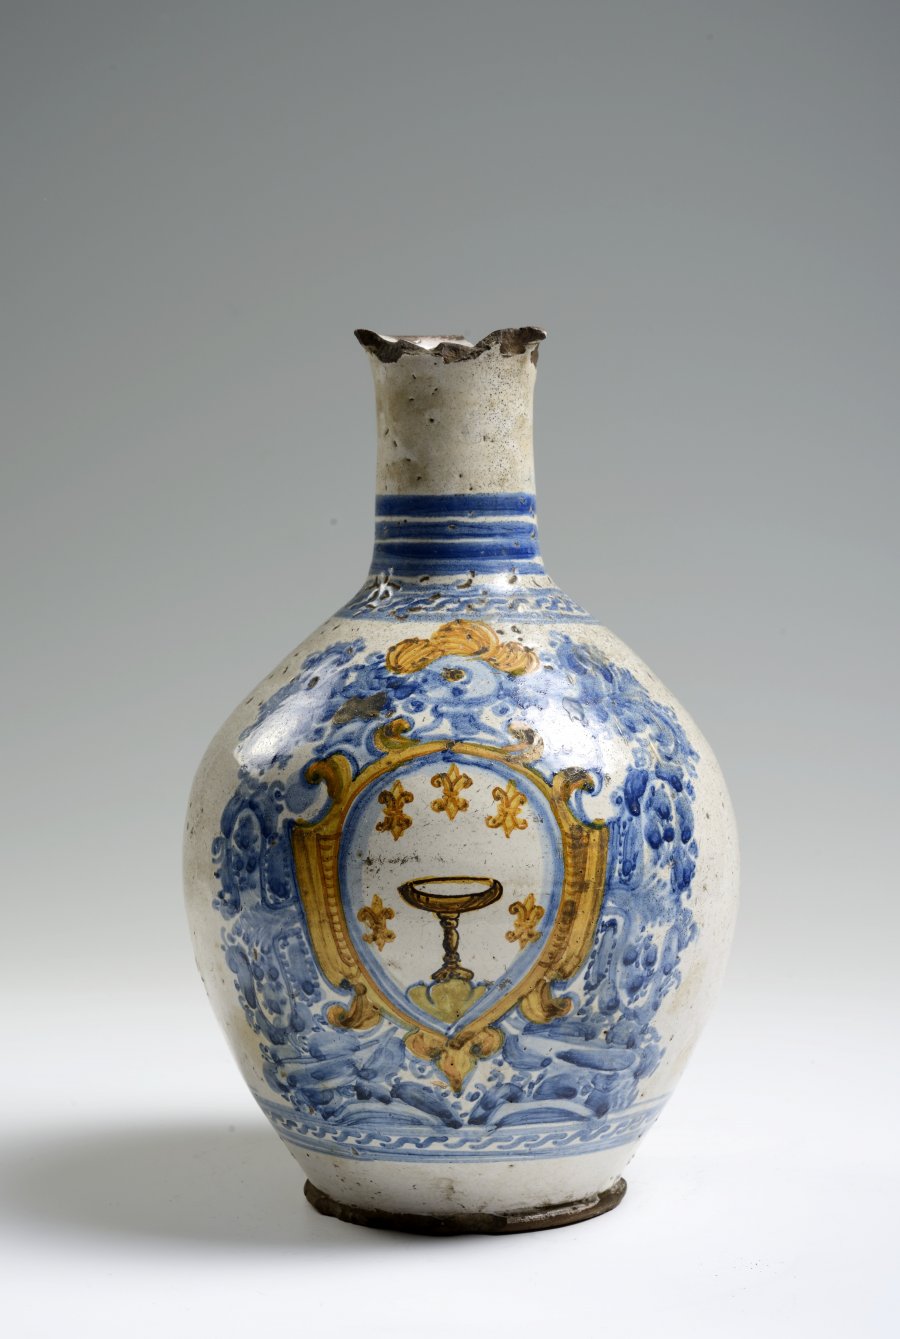 A MAJOLICA APOTHECARY BOTTLE WITH A HERALDRY MOTIF